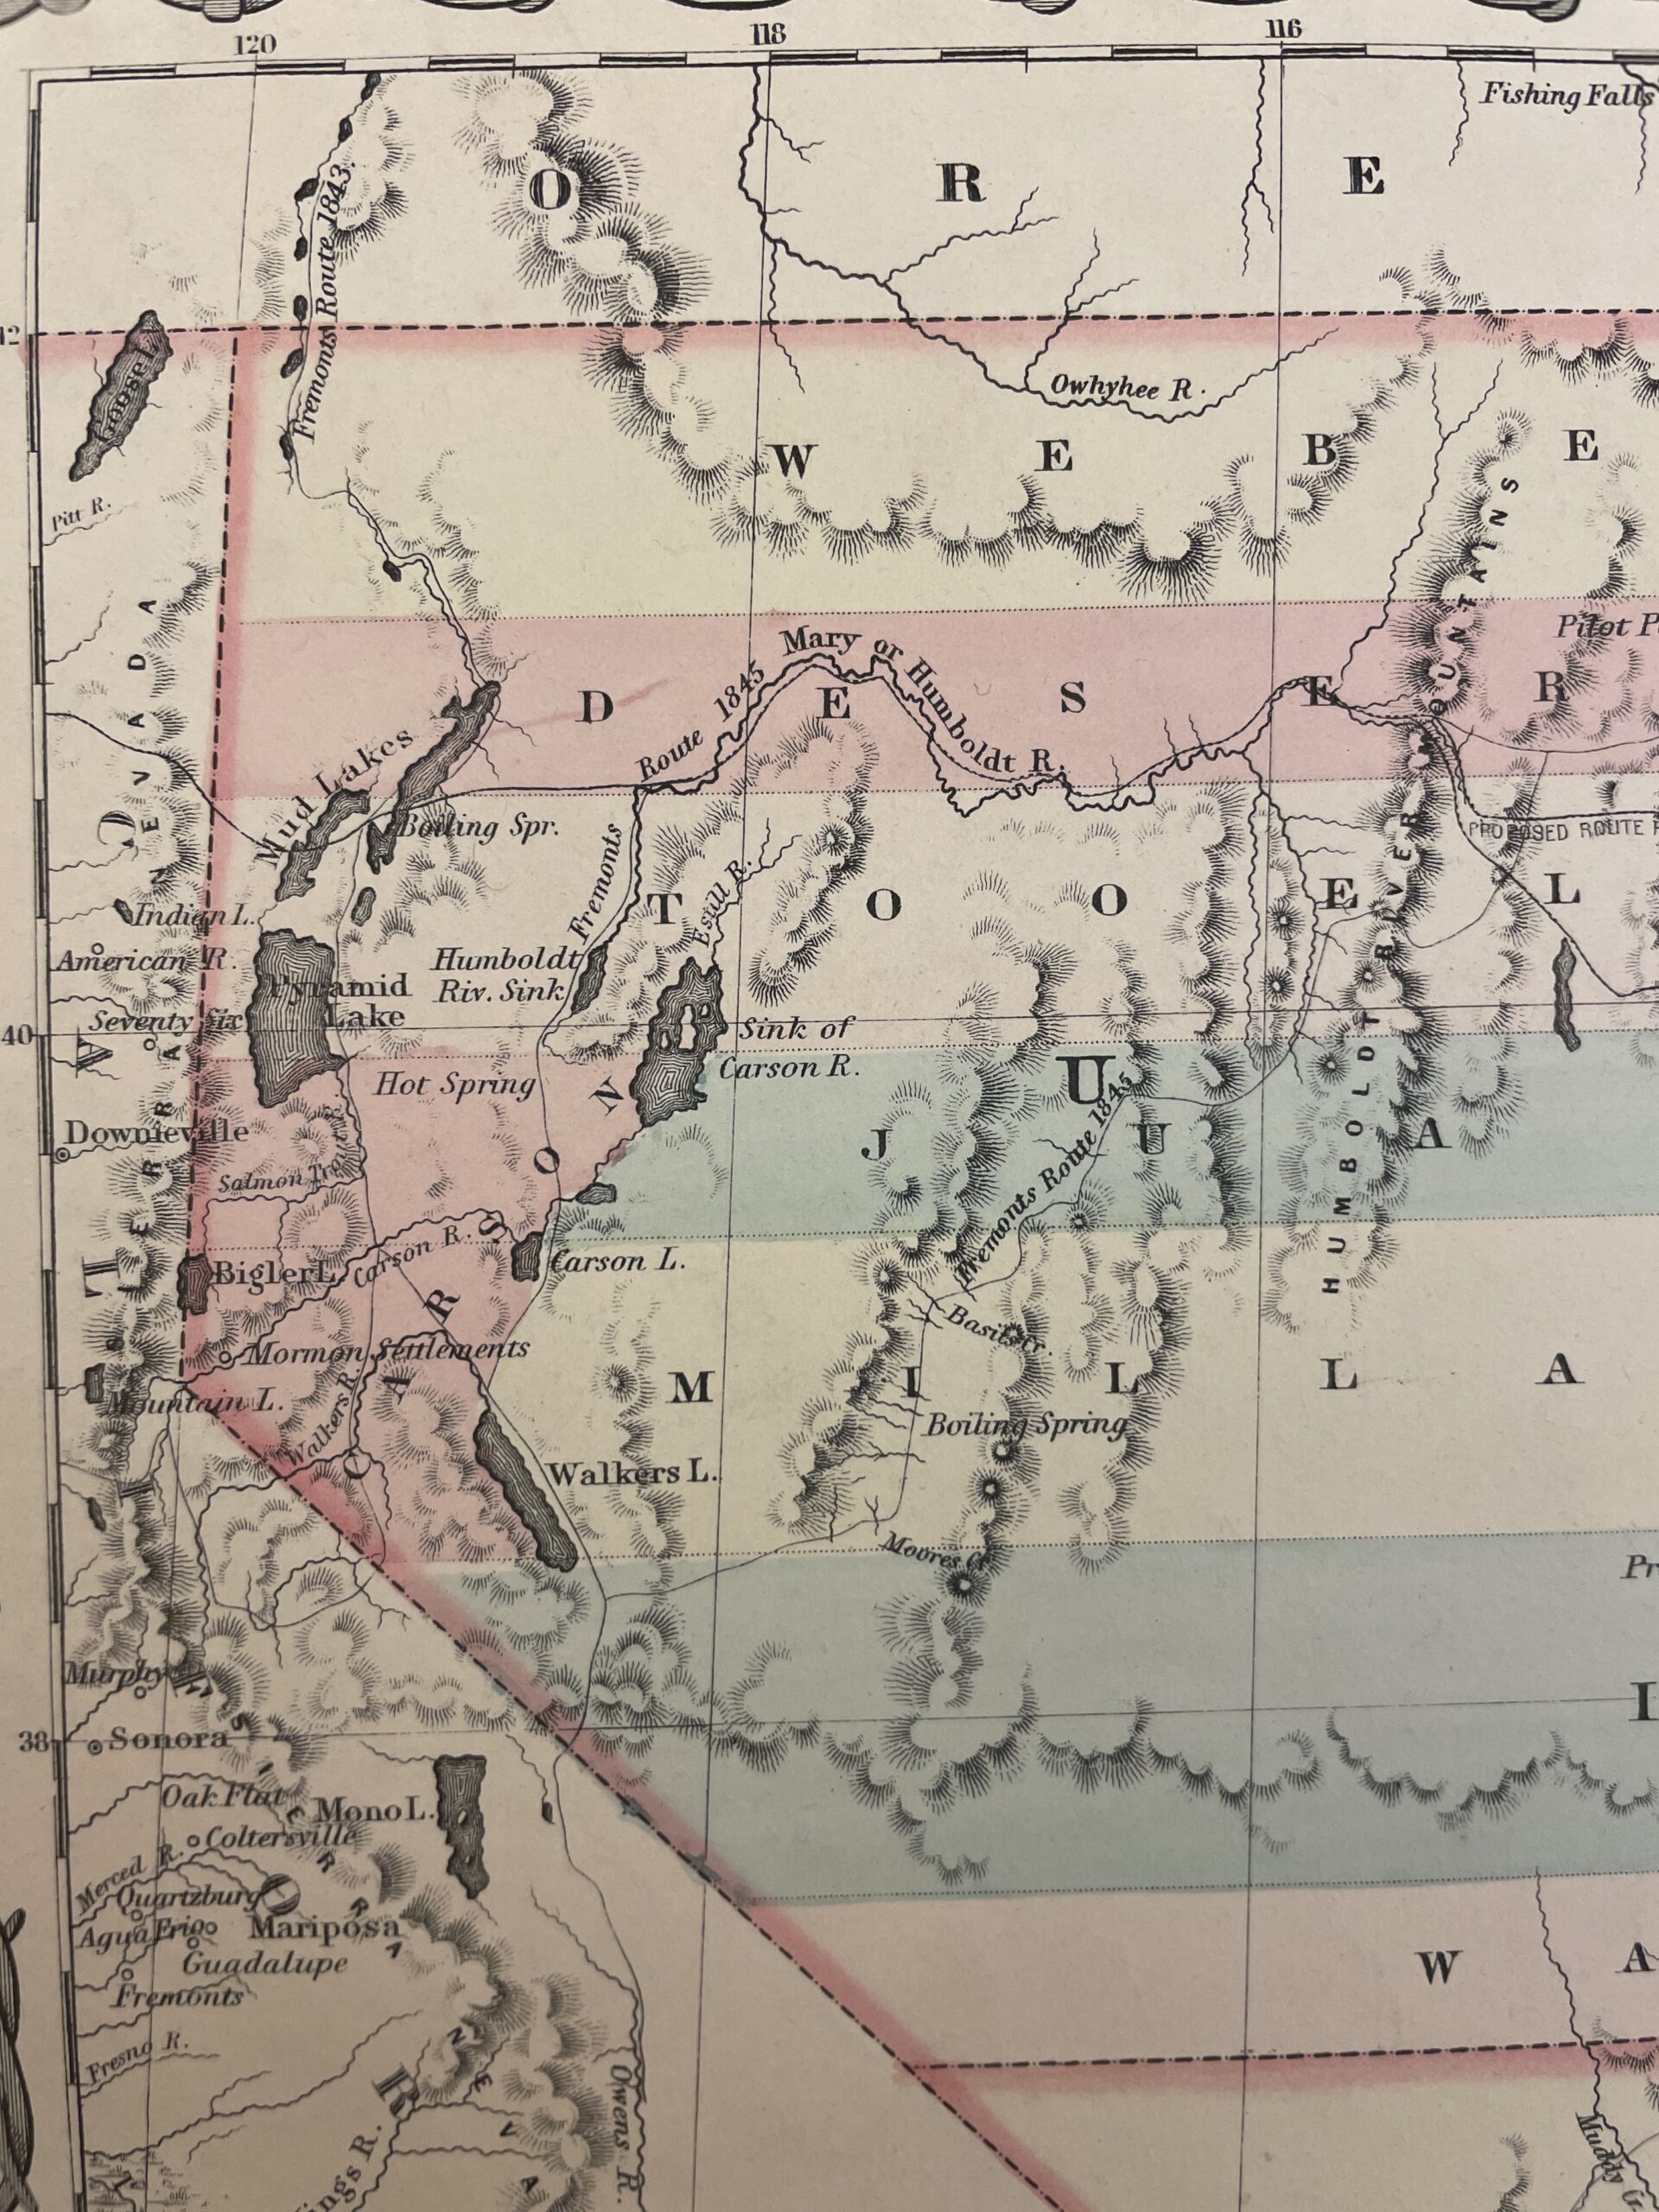 Enlargement of Coltons 1855 map, featuring Fremont's 1844 Route